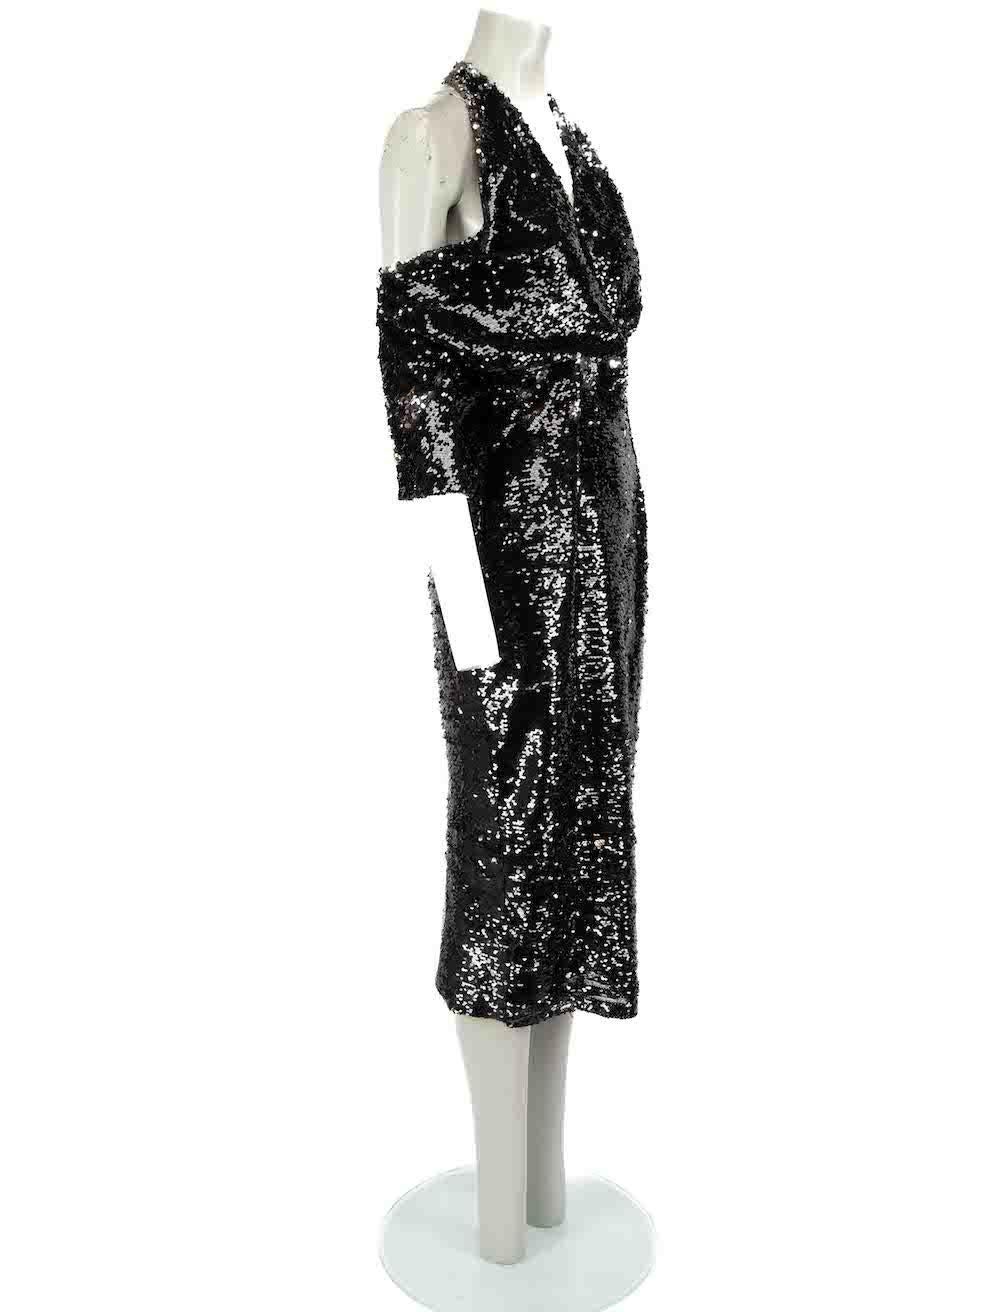 CONDITION is Never worn, with tags. No visible wear to dress is evident however on or two stray thread ends can be found on this new Safiyaa designer resale item.
 
 Details
 Black
 Synthetic
 Midi dress
 Sequinned
 V neckline
 Cold shoulder short